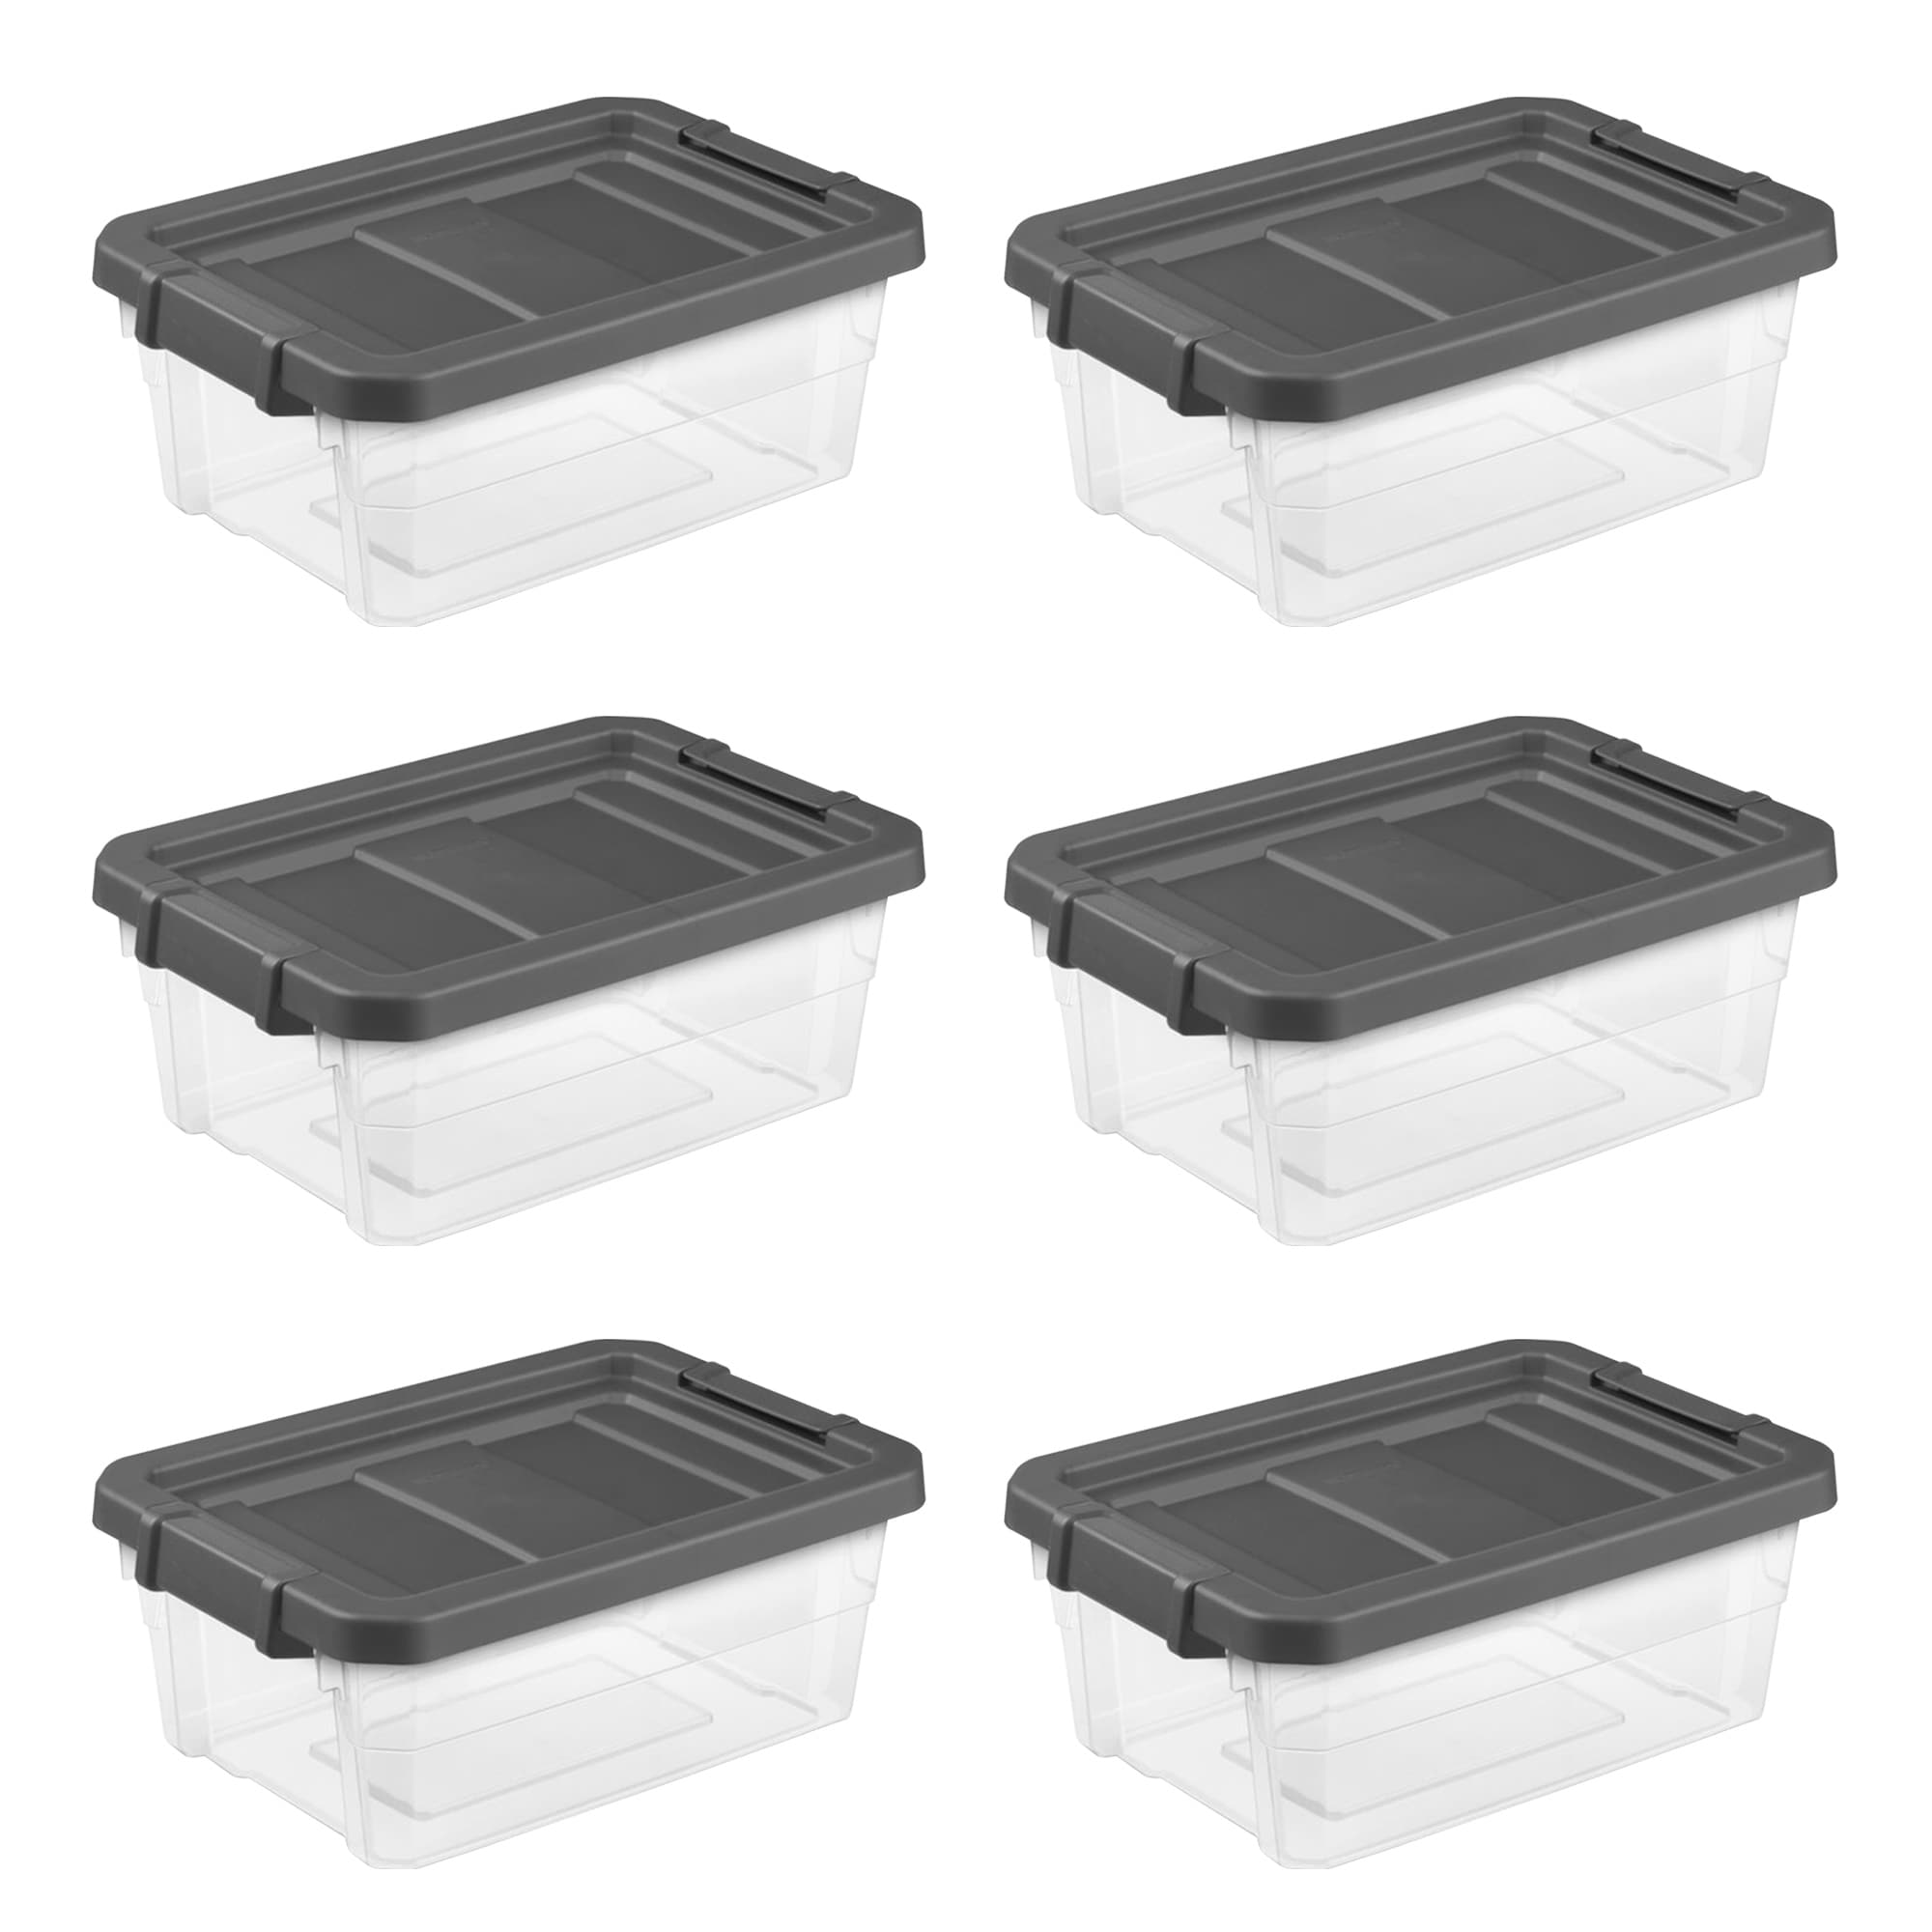 https://ak1.ostkcdn.com/images/products/is/images/direct/be2cc2d53299dc8f3f944221bfbe986c32aebb12/Sterilite-16-Qt-Clear-Plastic-Stacking-Storage-Containers-with-Gray-Lid-%286-Pack%29.jpg